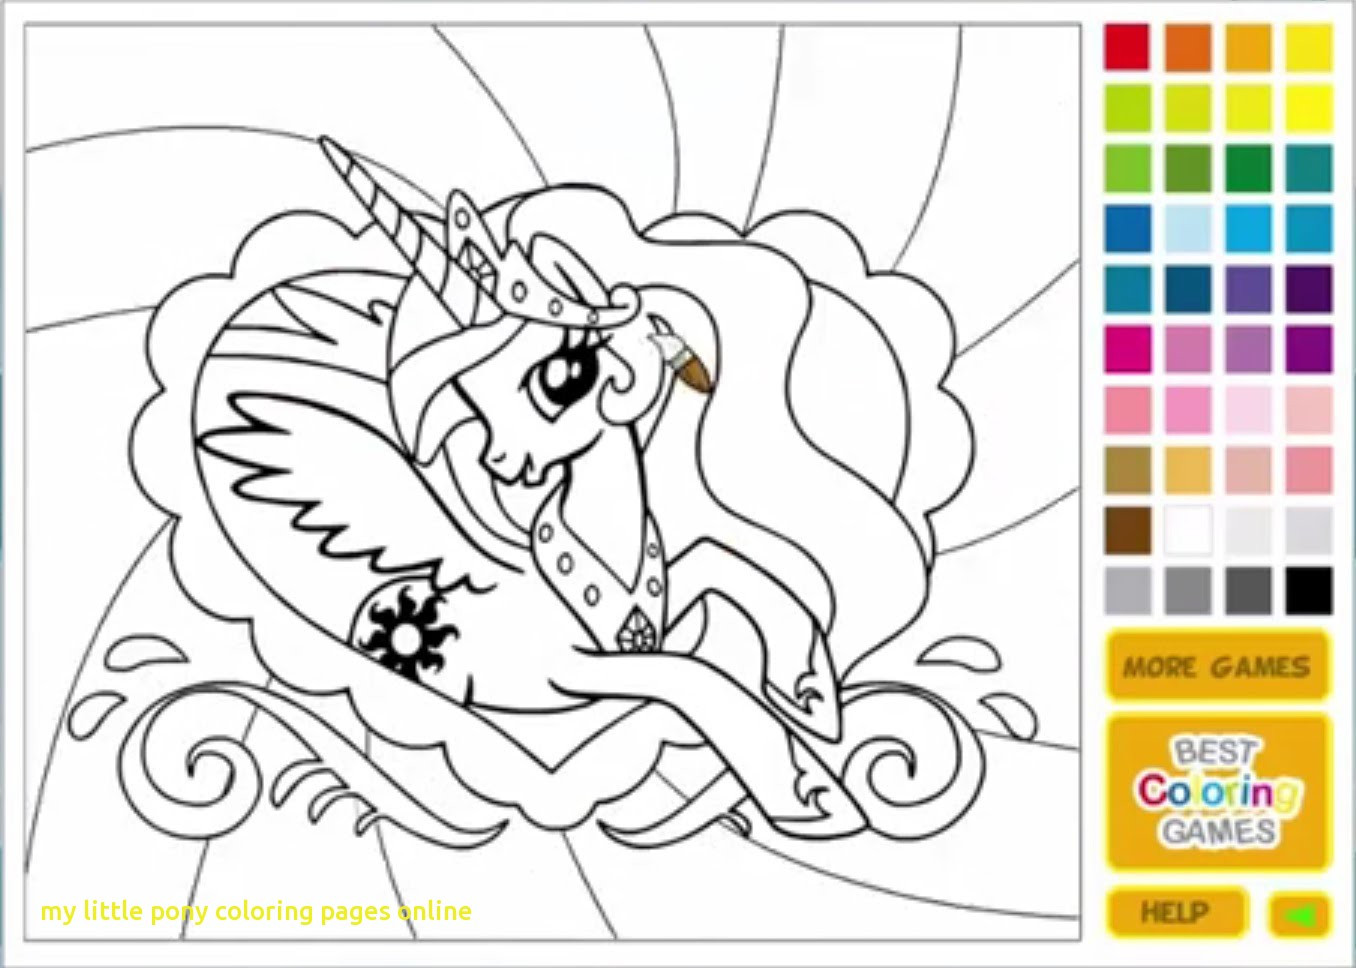 Coloring Book For Kids Online
 My Little Pony Coloring Pages line